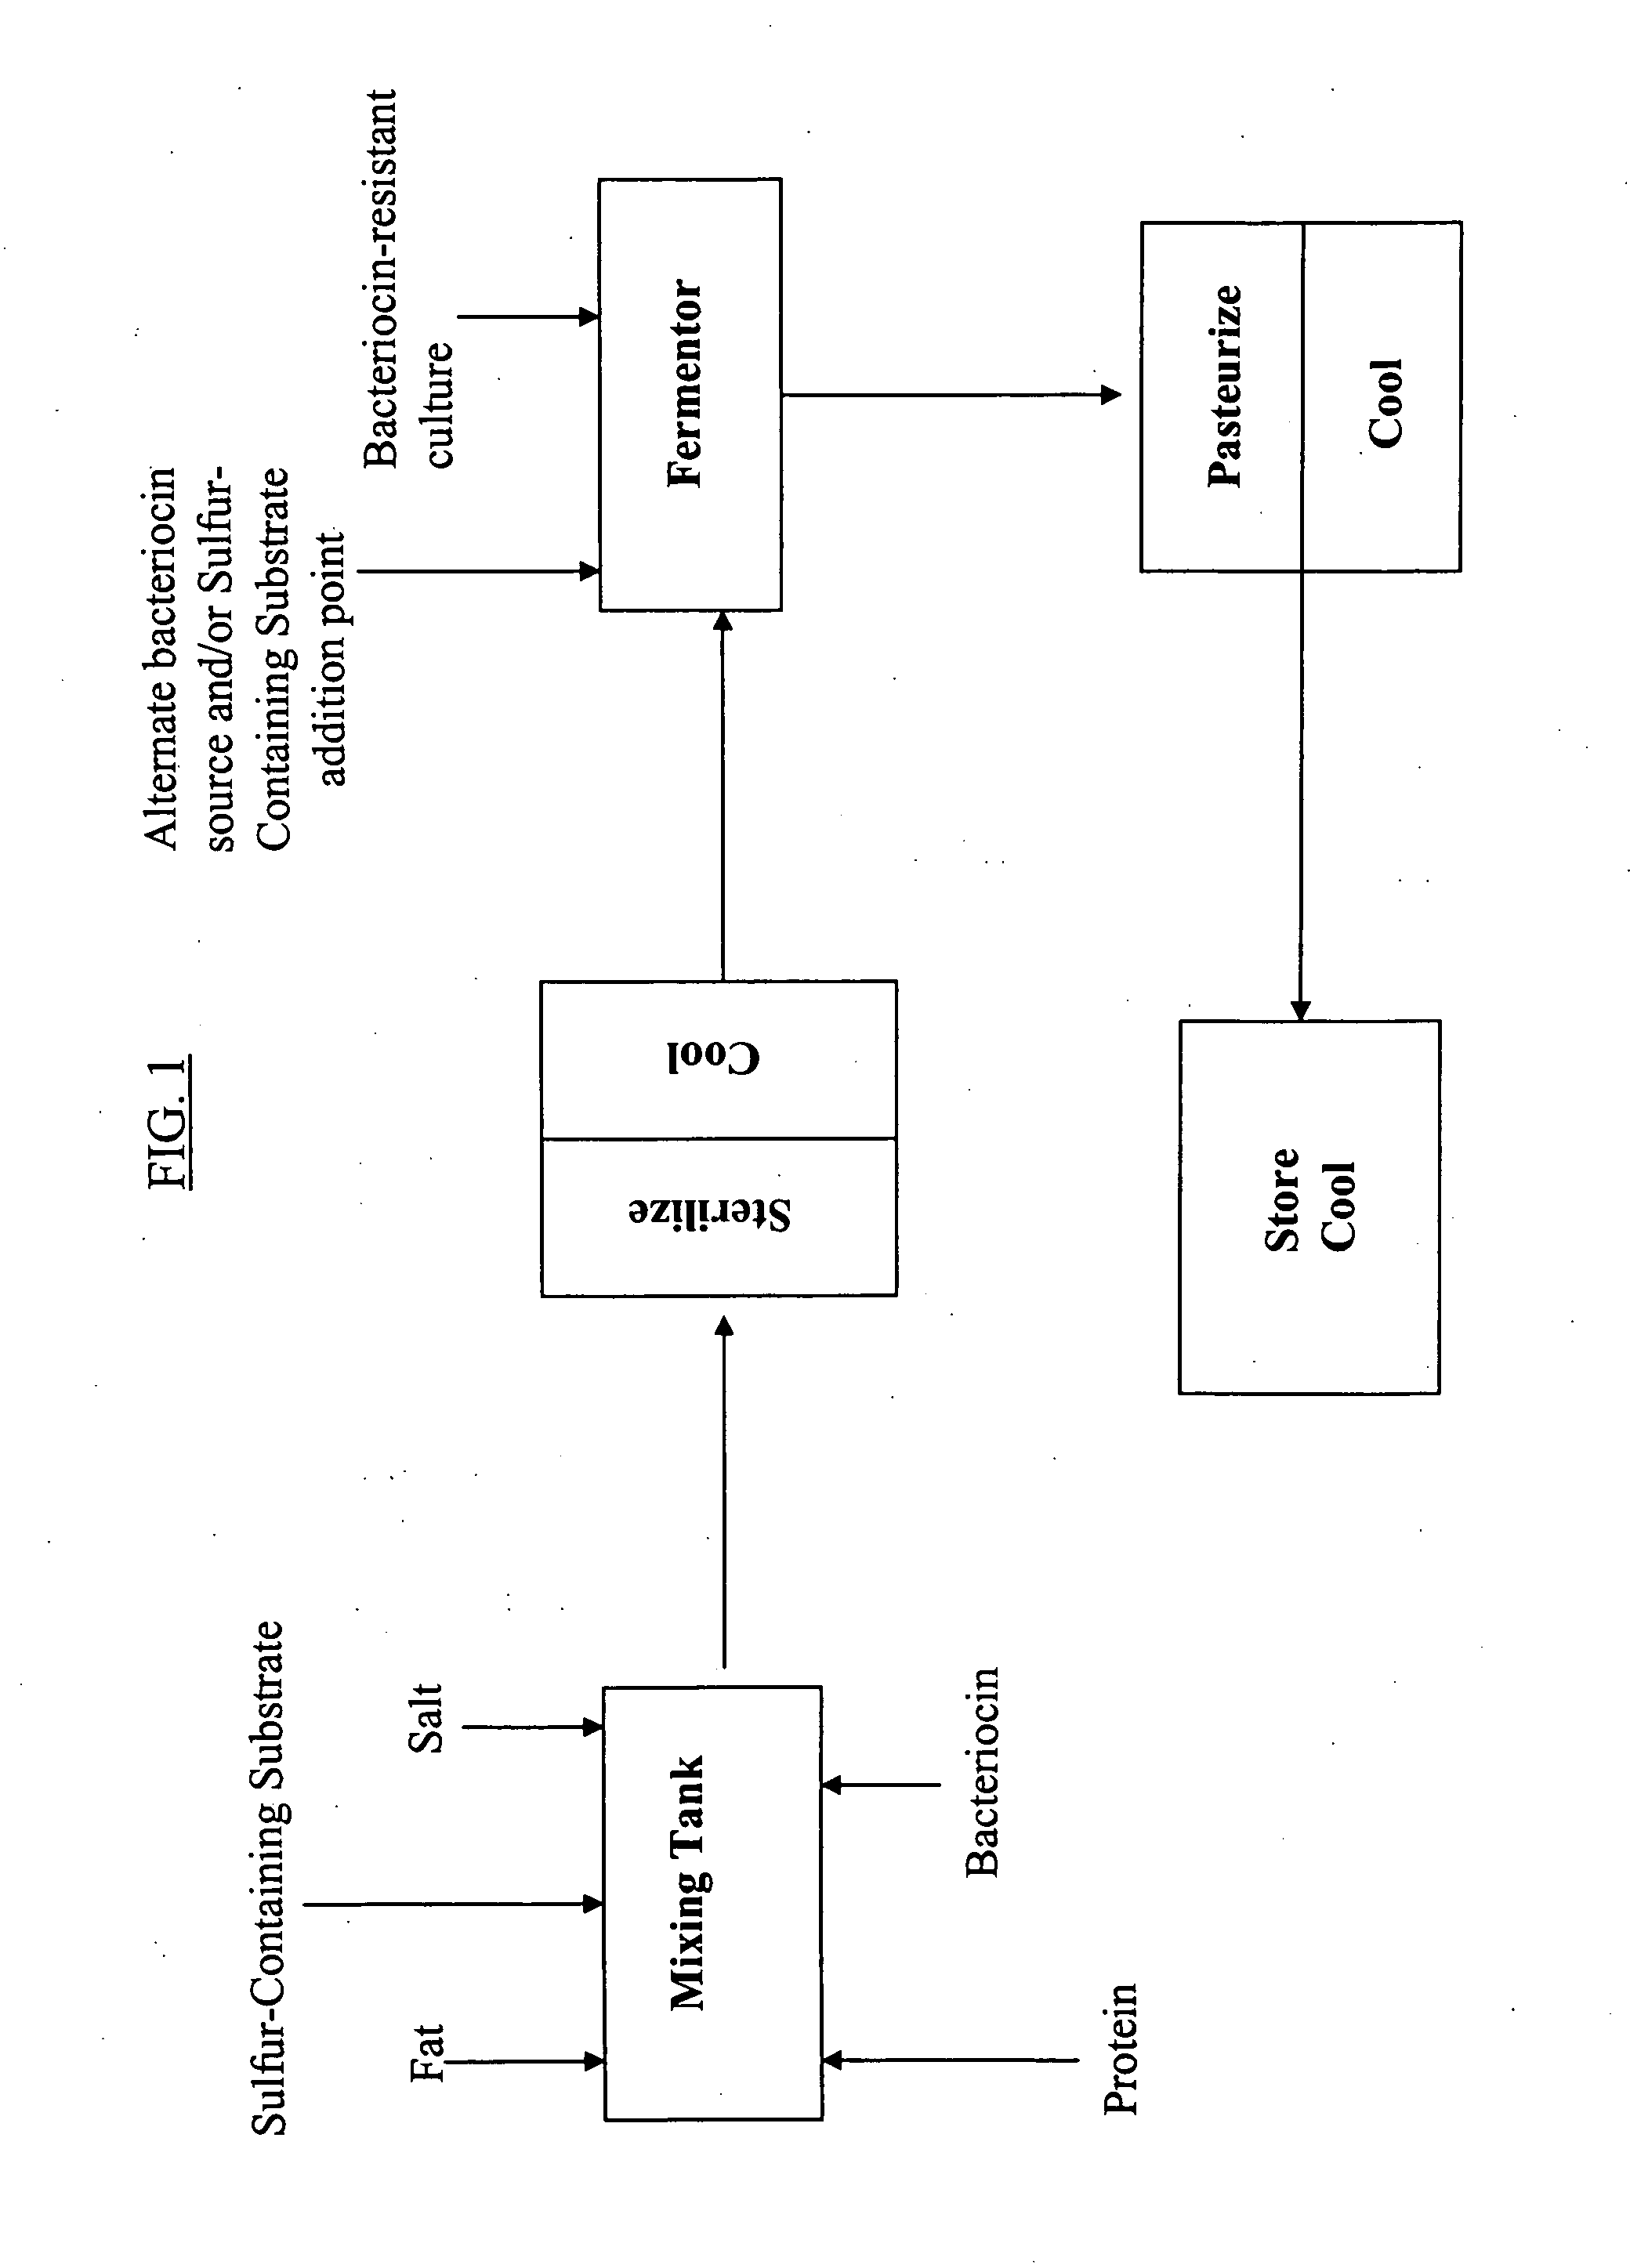 Methods for rapid production and usage of biogenerated flavors